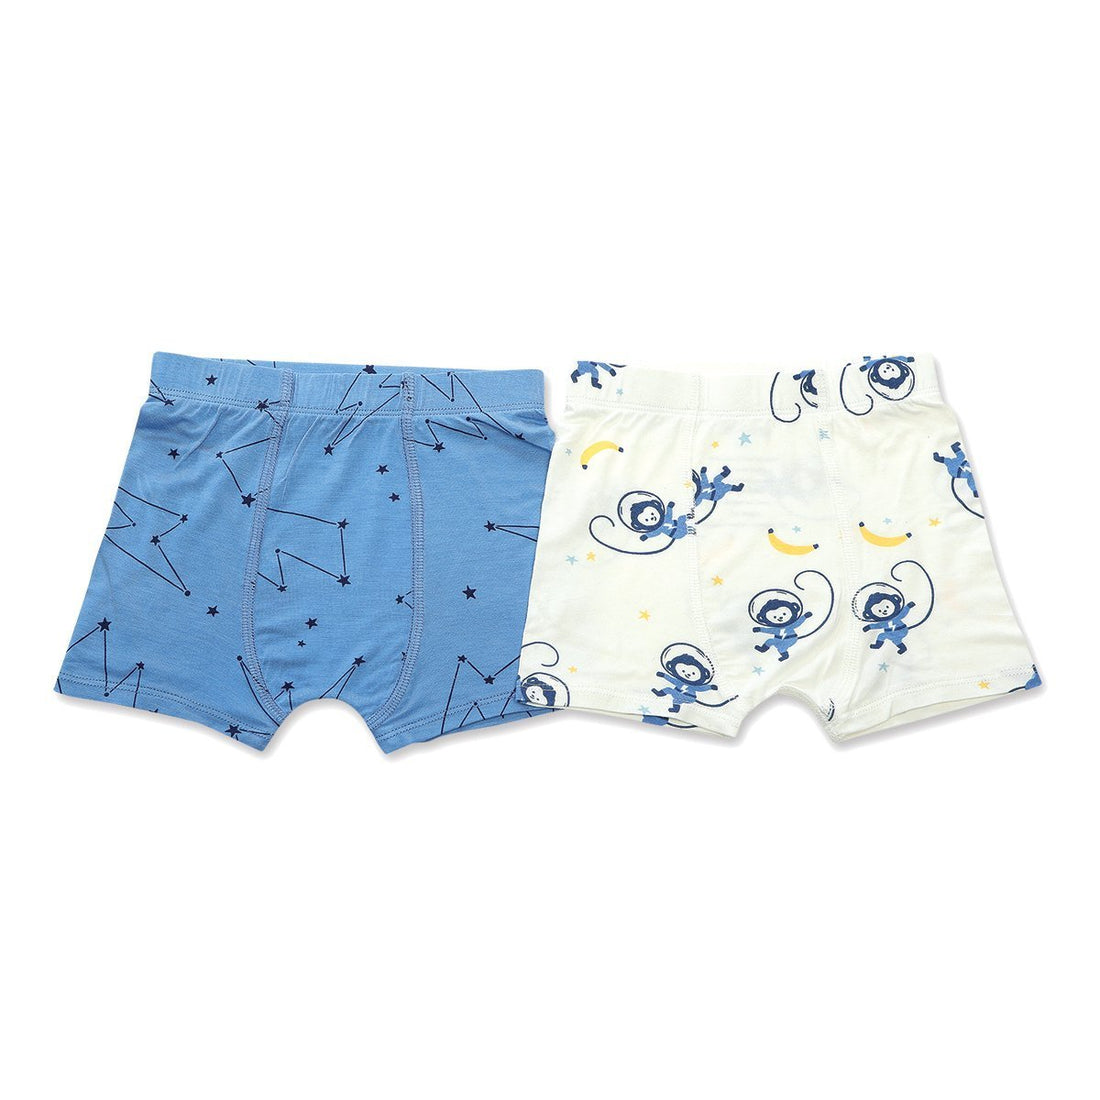 Bamboo Boys Underwear Shorts 2 pack (Light Up the Sky Print/Space Monkey Print)